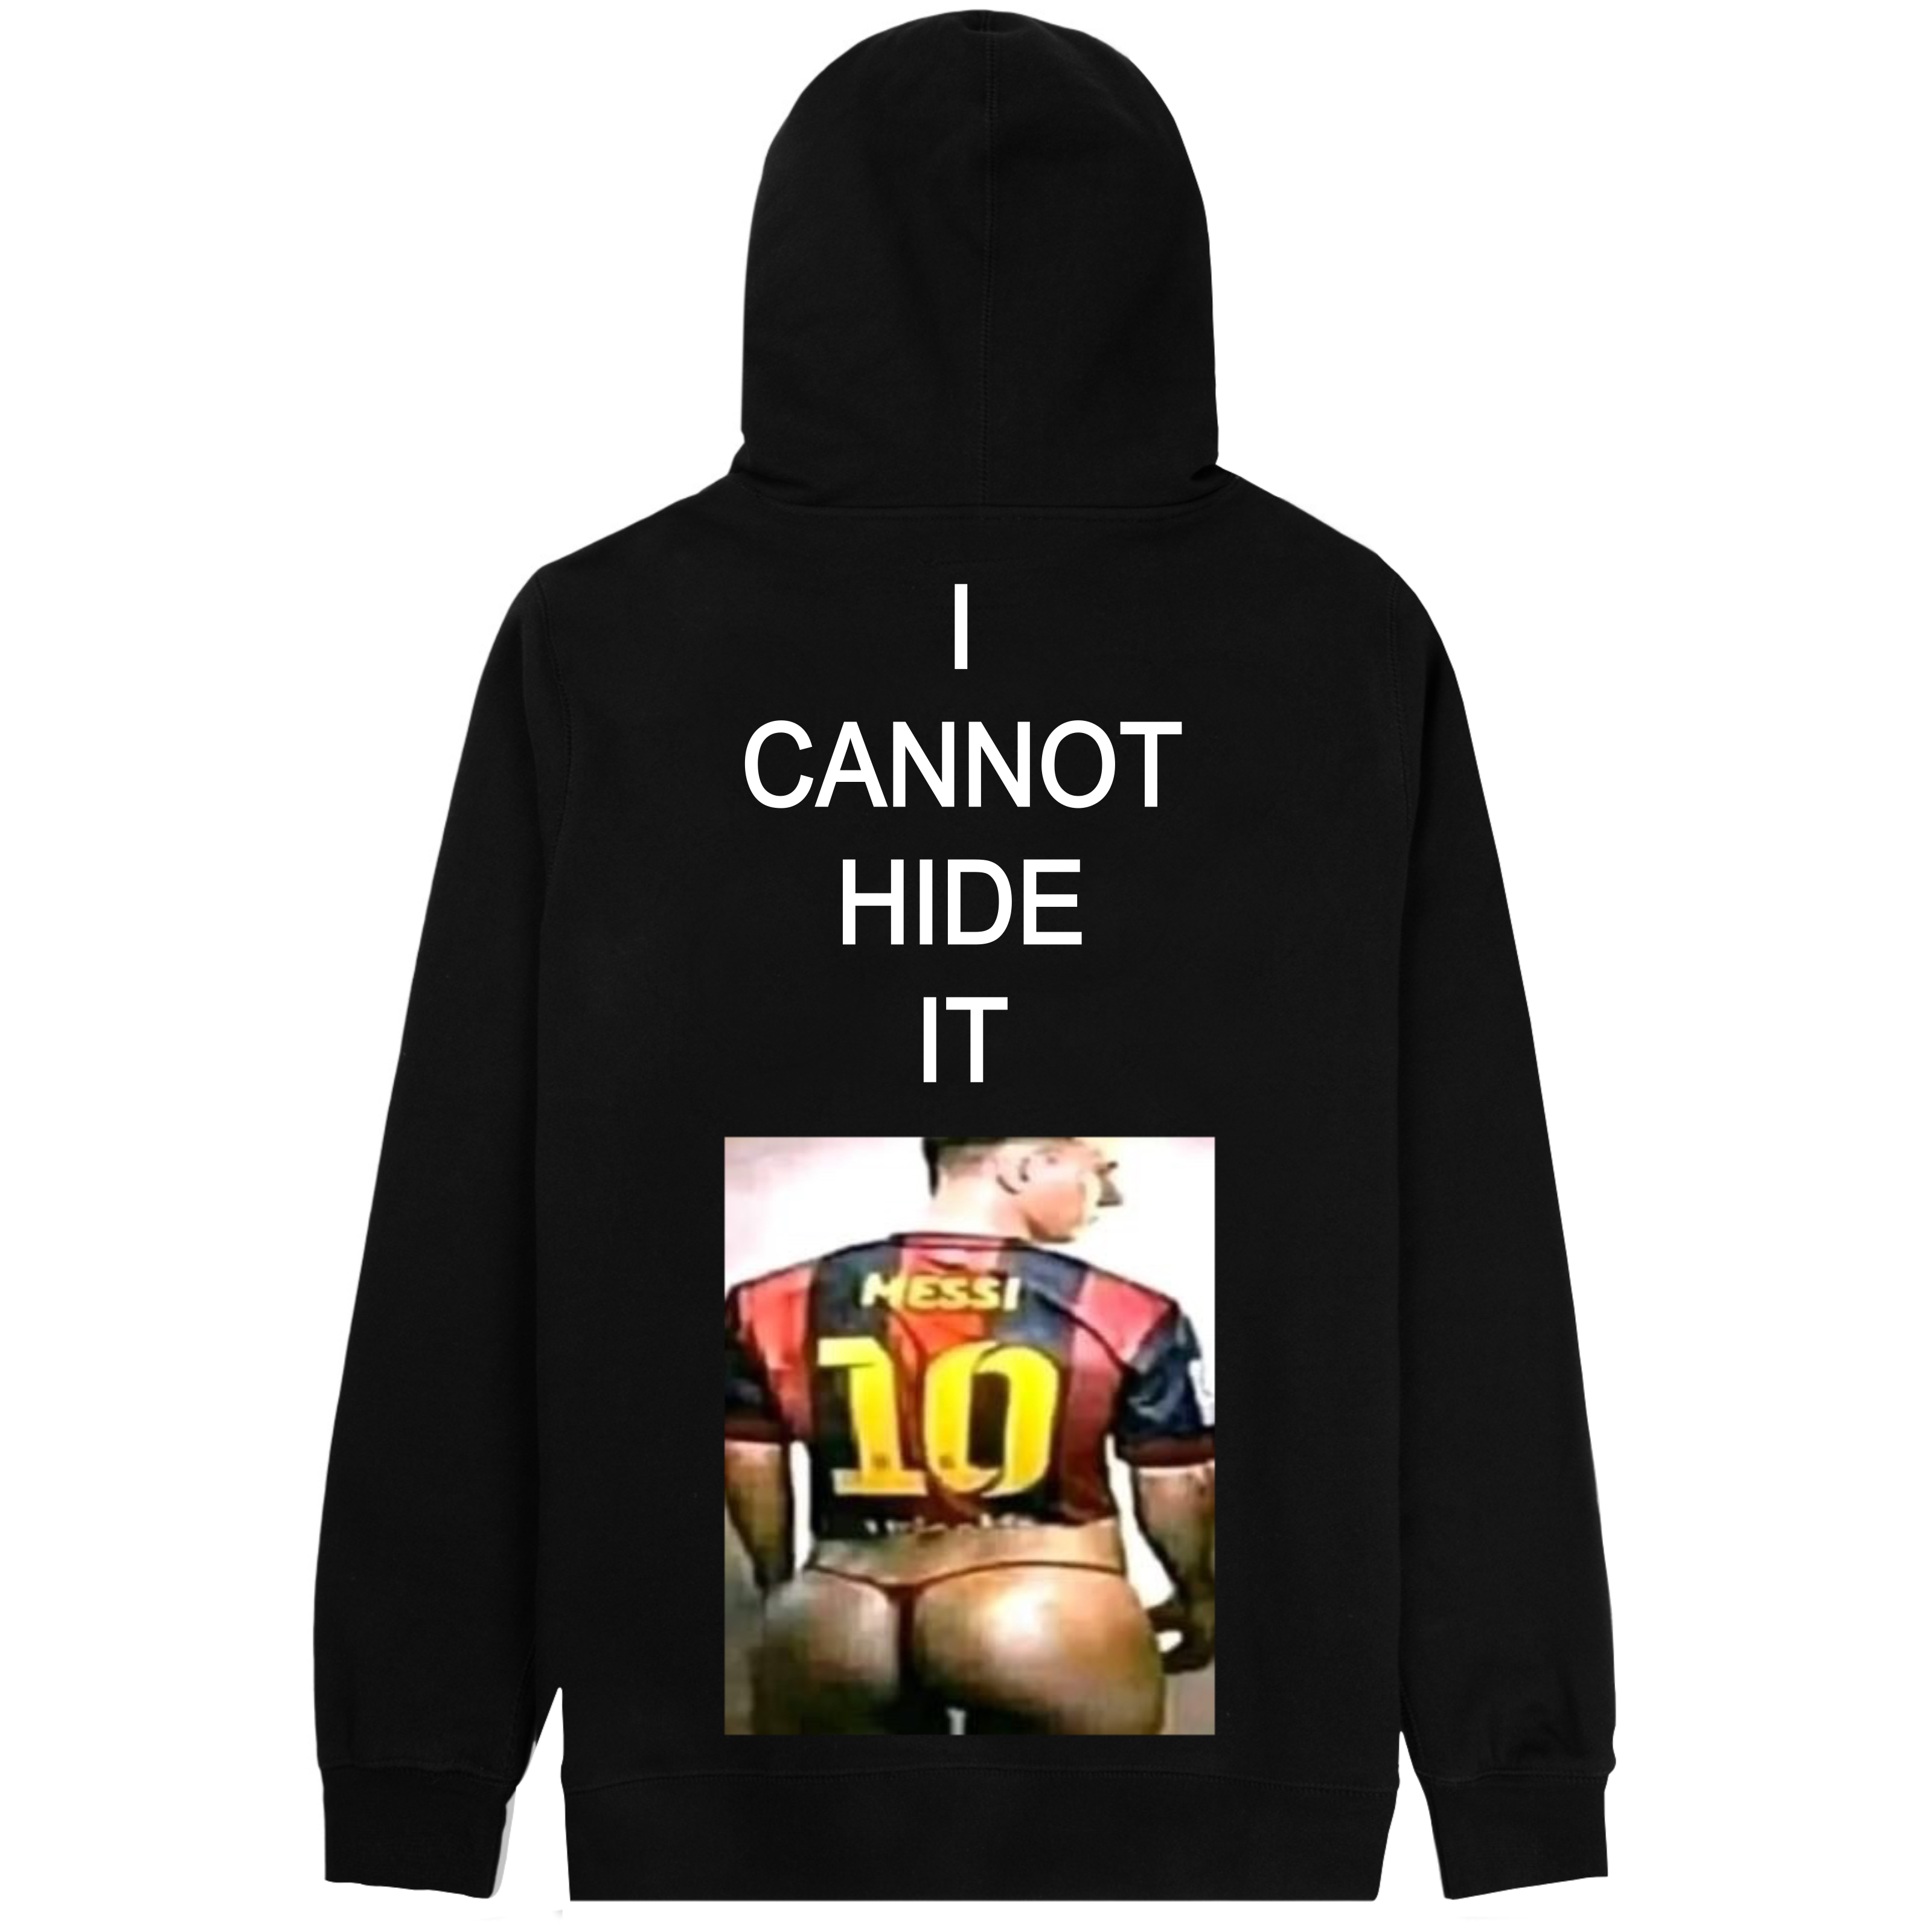 I cannot hide it Hoodie